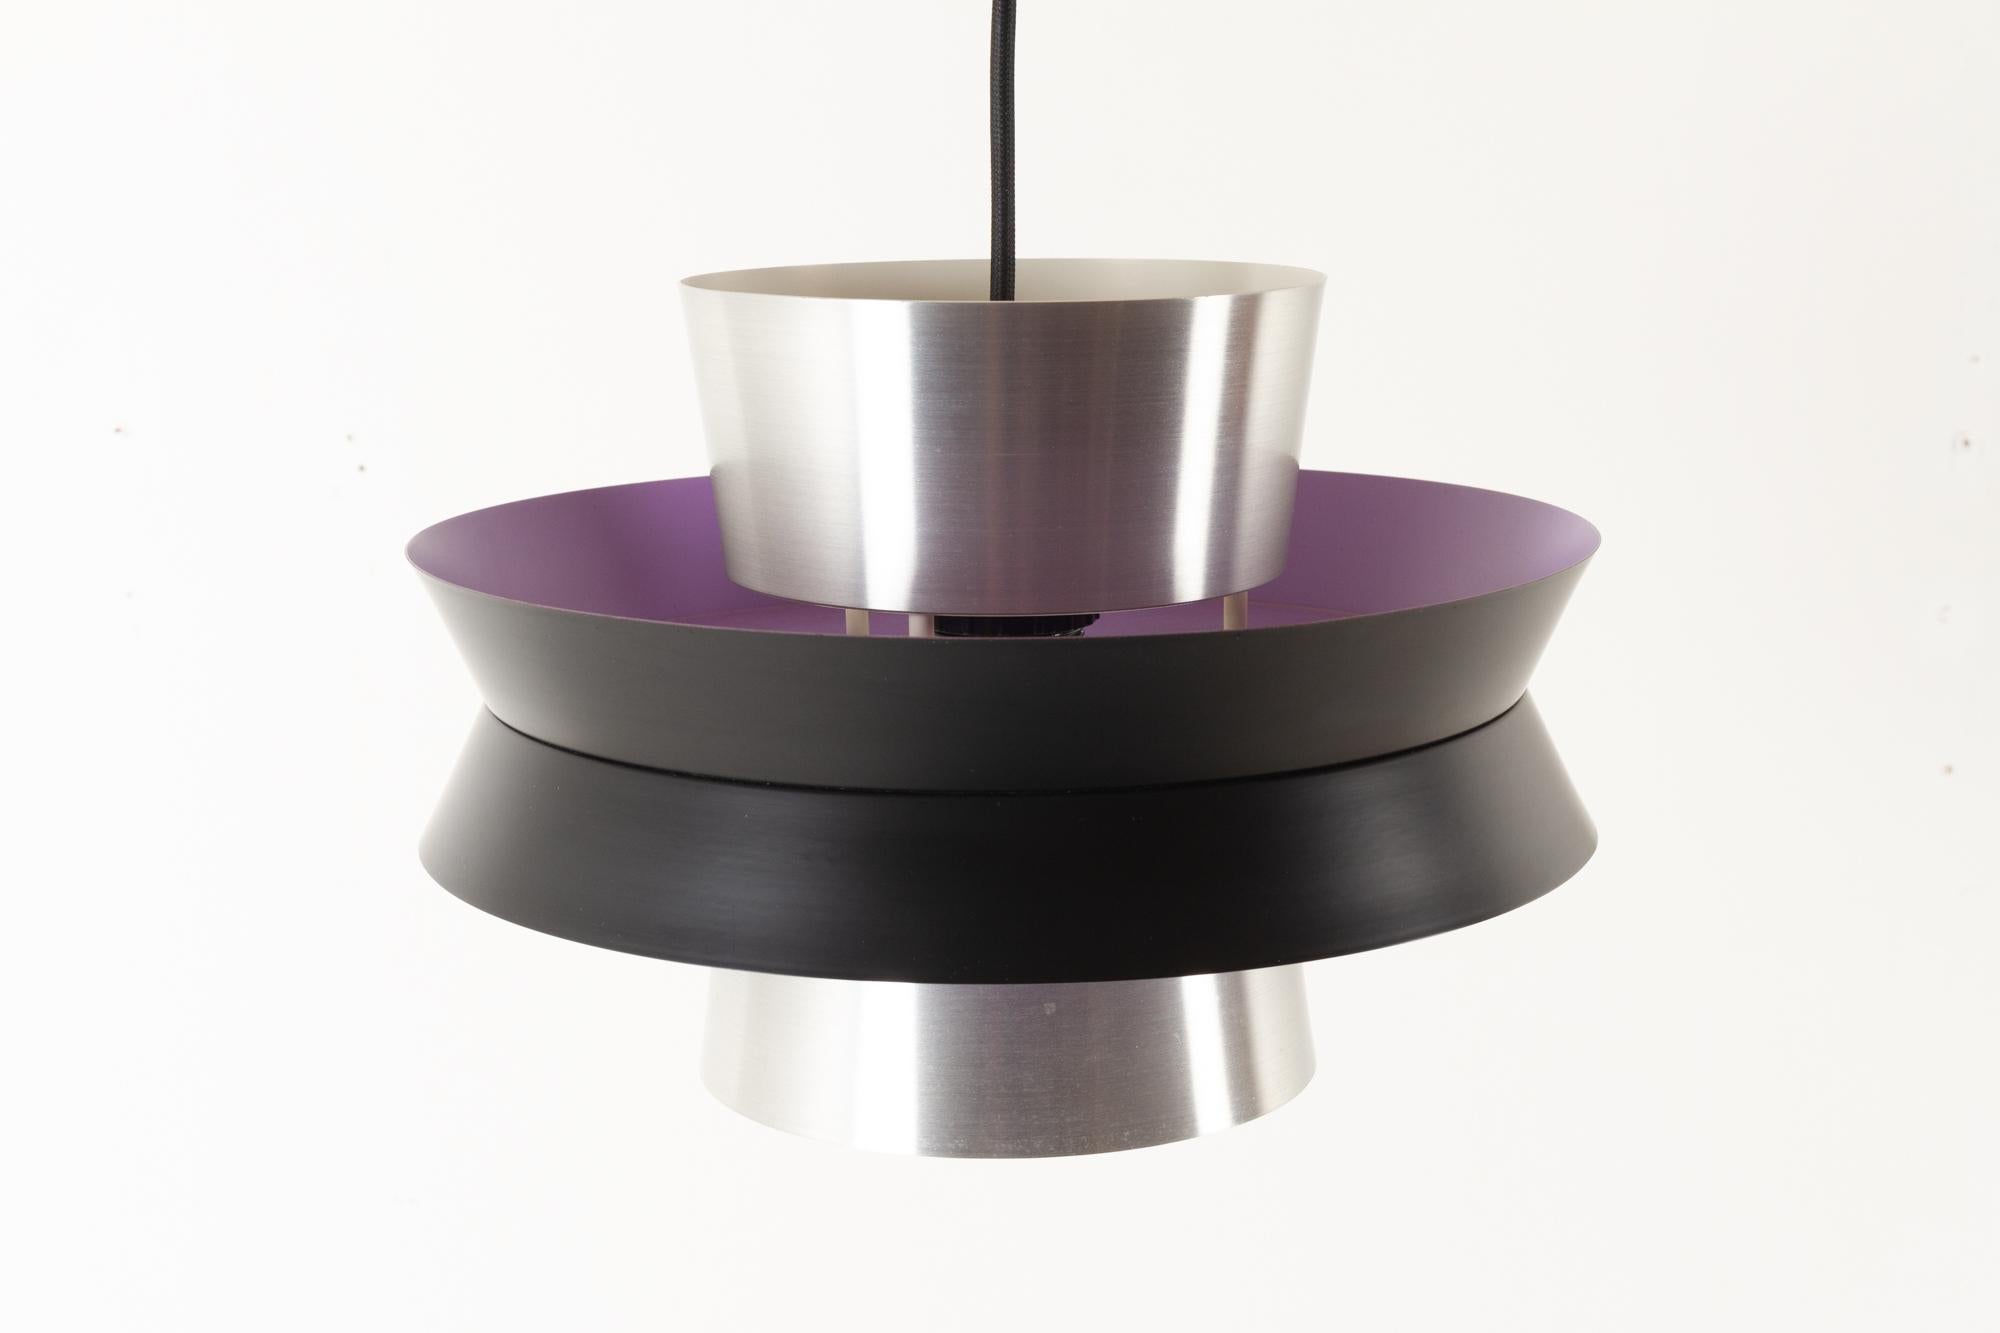 Scandinavian Modern ceiling pendant by Carl Thore for Granhaga Metallindustri , Sweden in the 1960s.

Ceiling lamp with multiple shades in aluminum. Outside in black and silver. Inside in purple and white. Very beautiful Scandinavian Modern lamp,